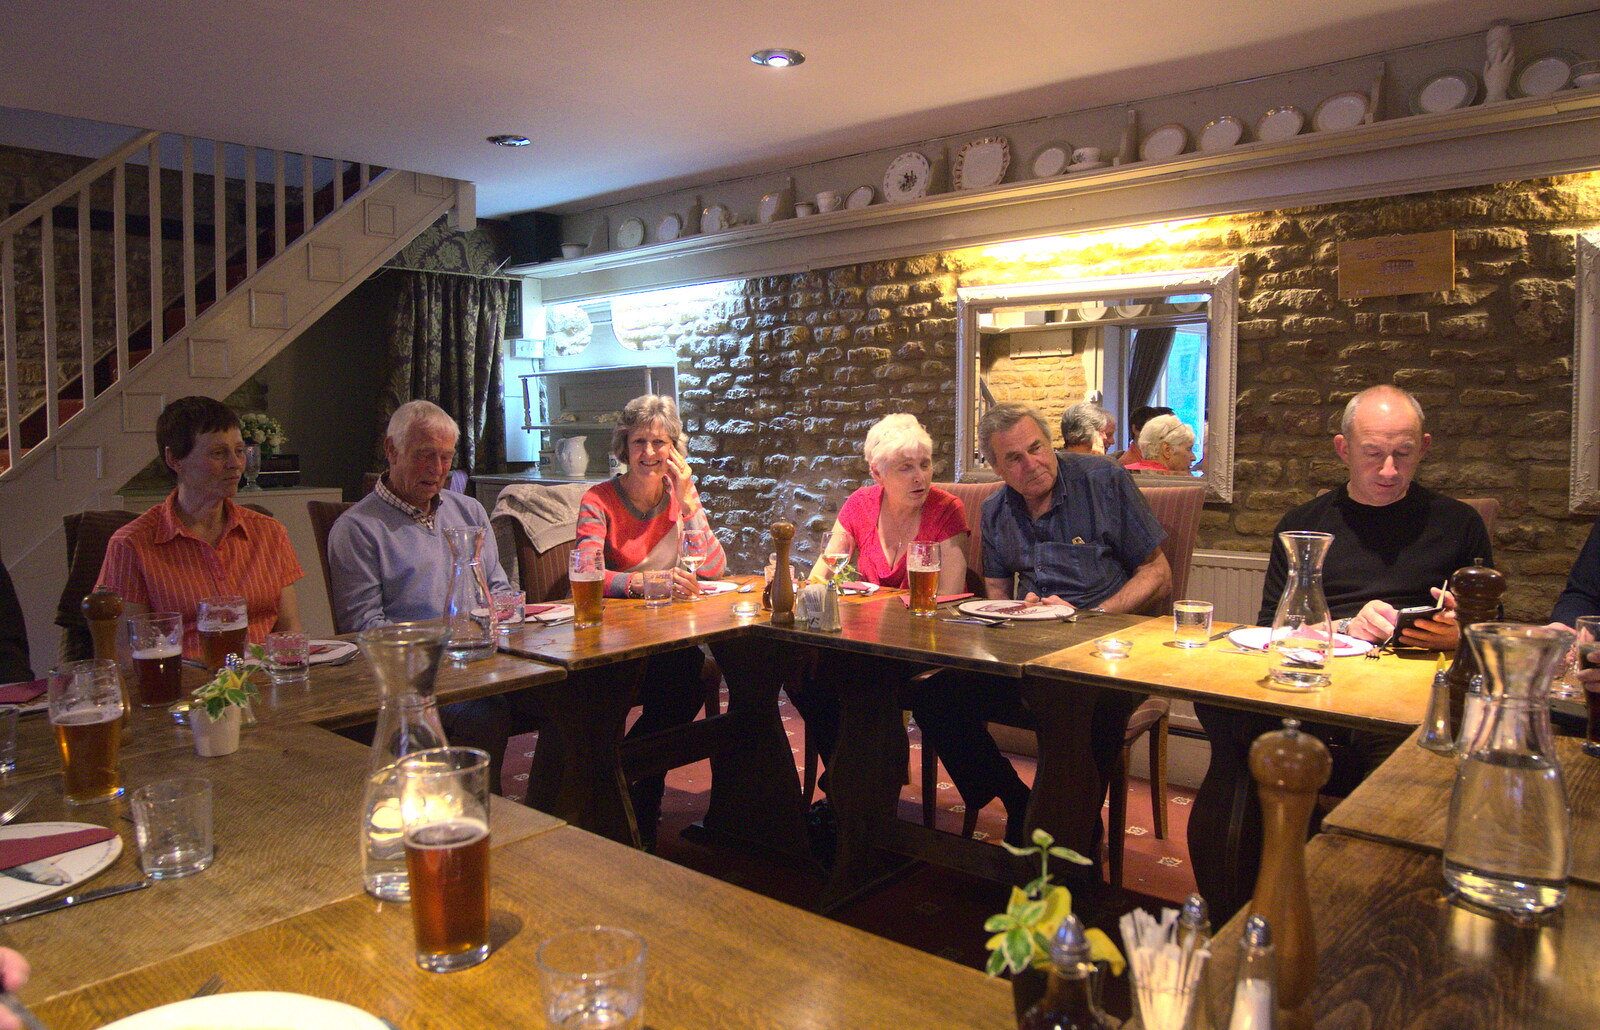 The BSCC Top Table from The BSCC Weekend Away, Lyddington, Rutland - 9th May 2015